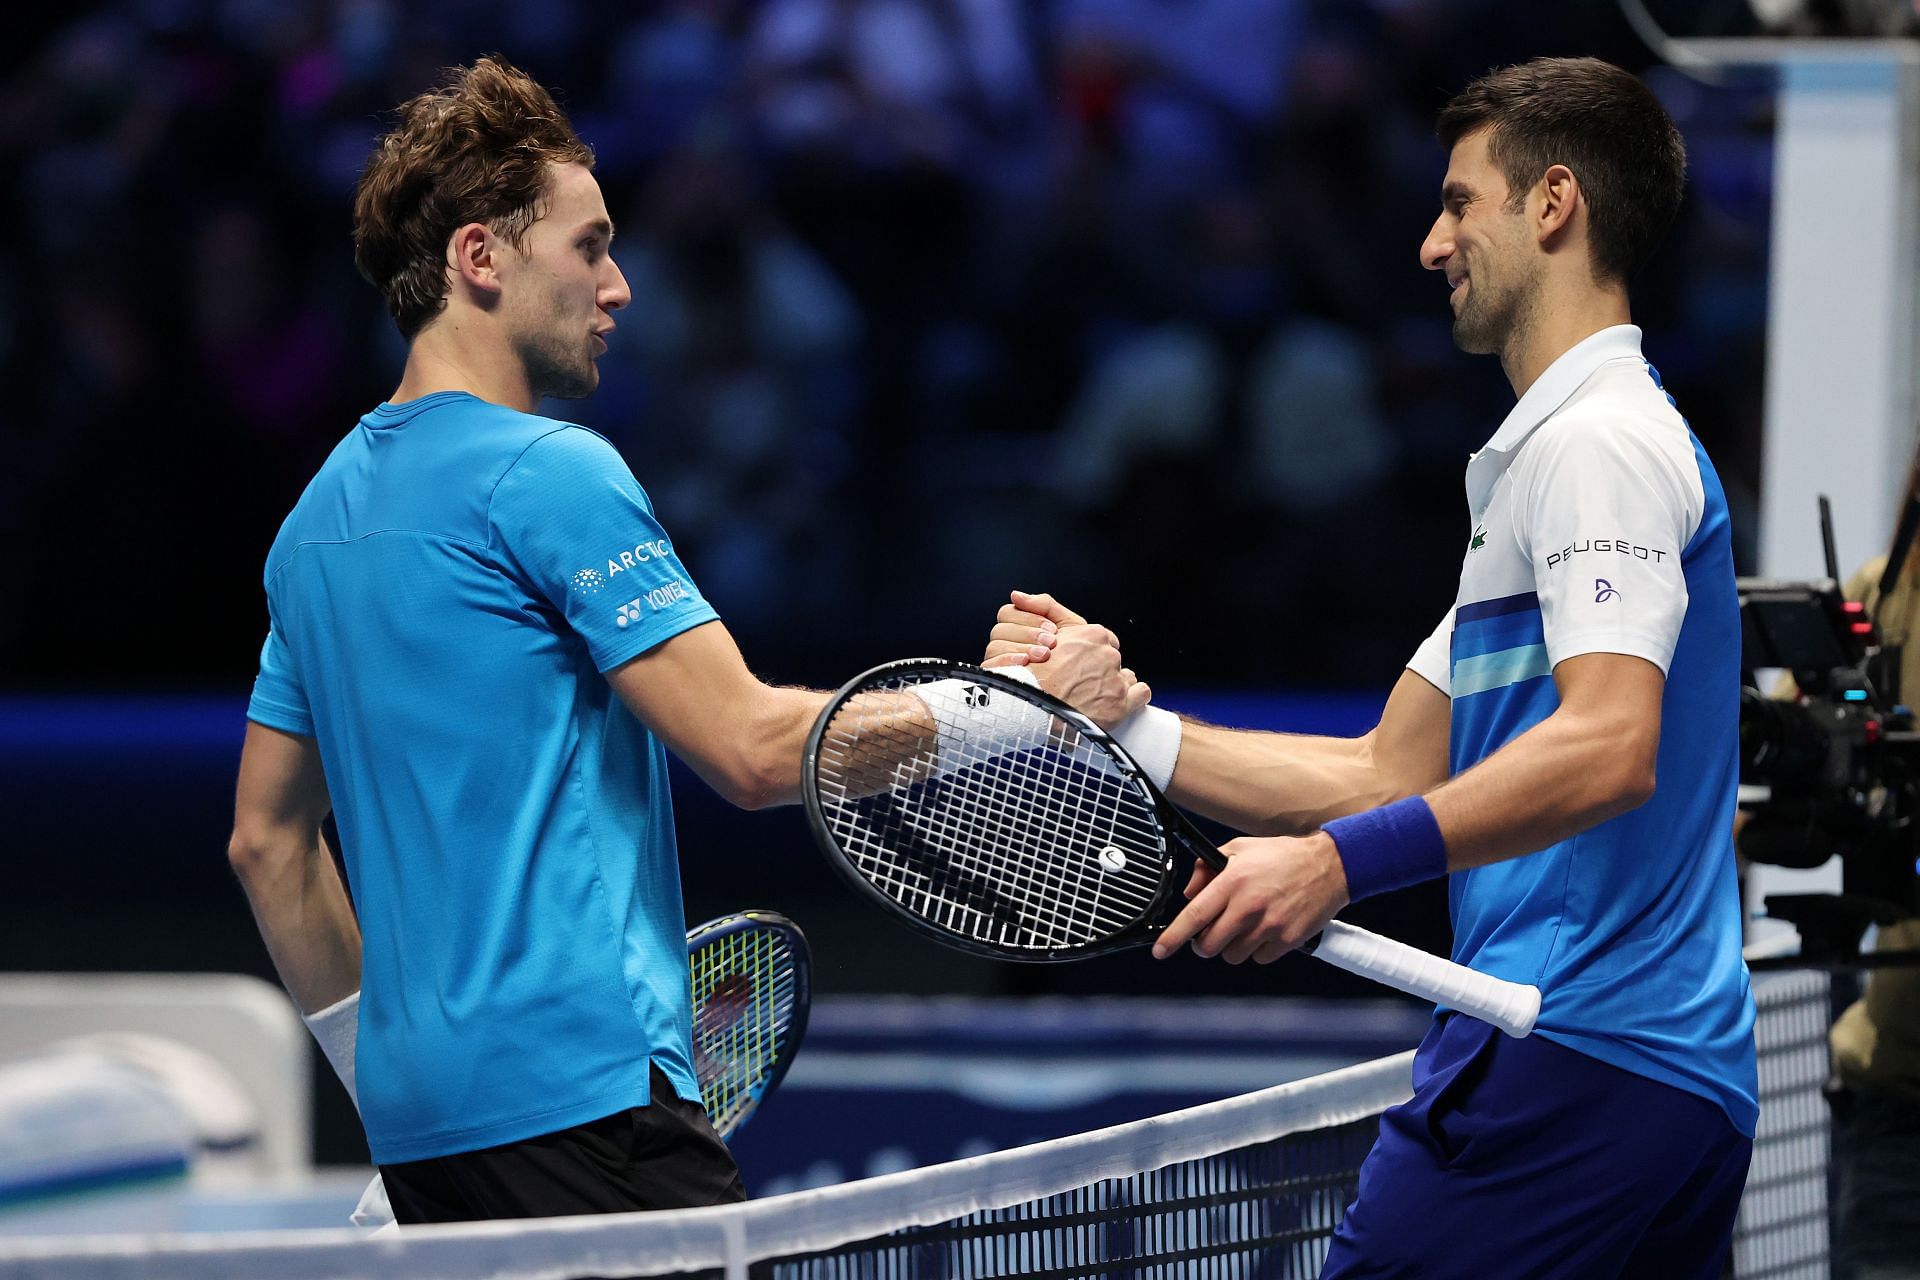 Novak Djokovic and Casper Ruud shake hands after their match at the 2021 Nitto ATP Finals